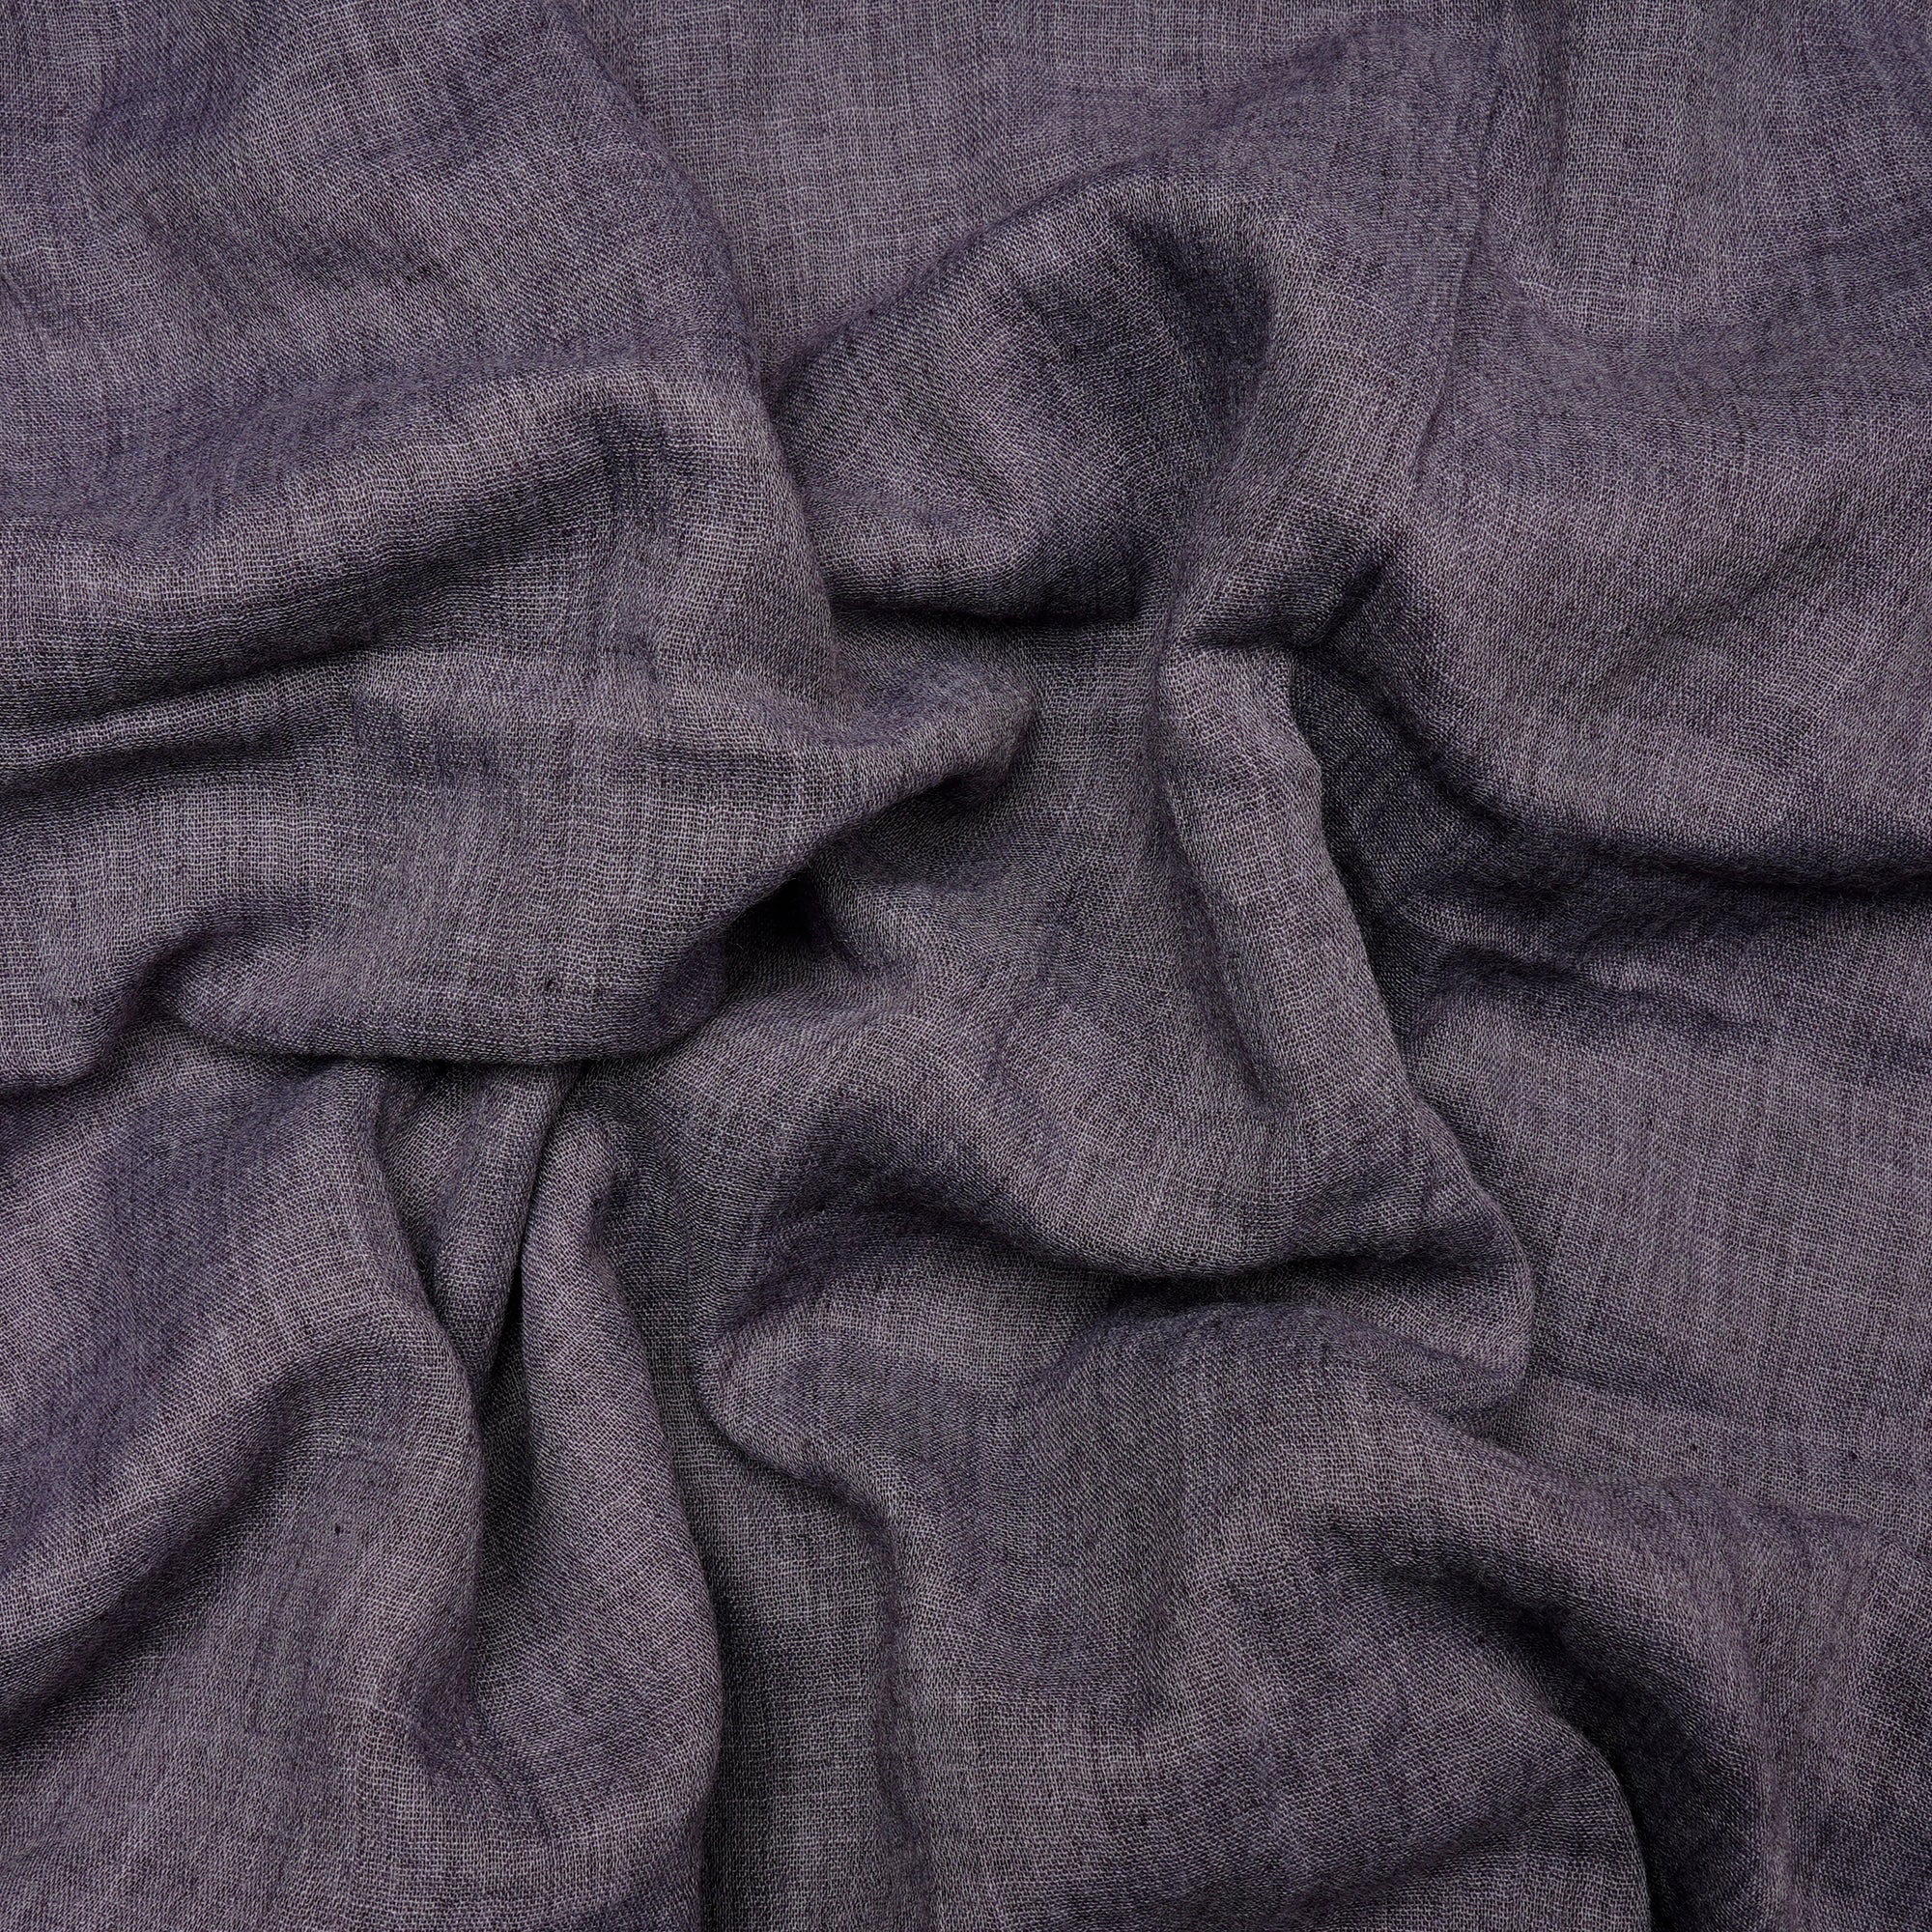 Heather Cheese Cotton Chambray Fabric